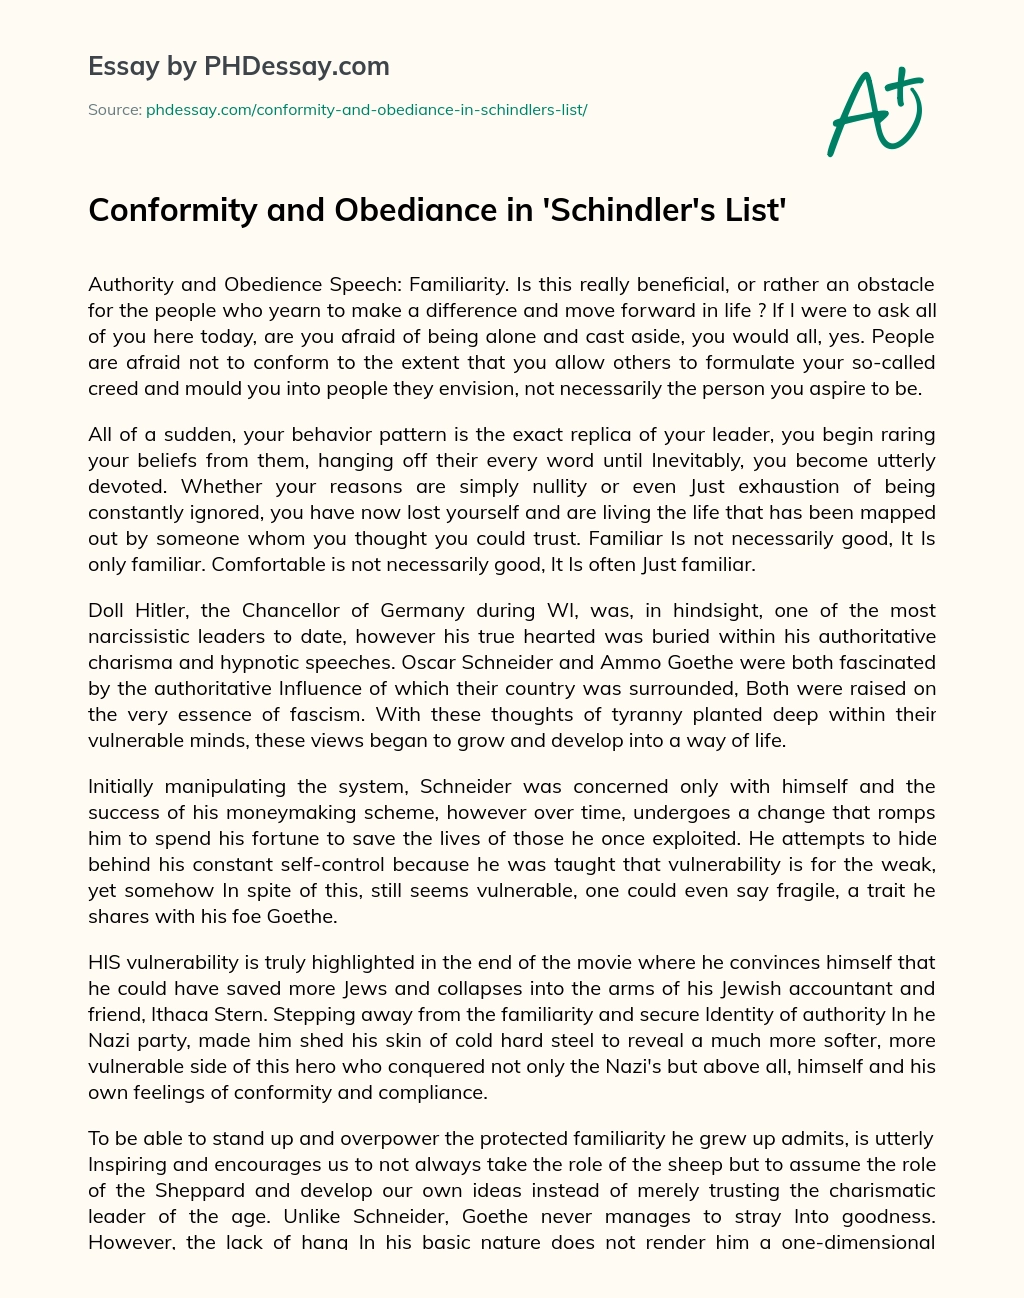 Conformity and Obediance in ‘Schindler’s List’ essay